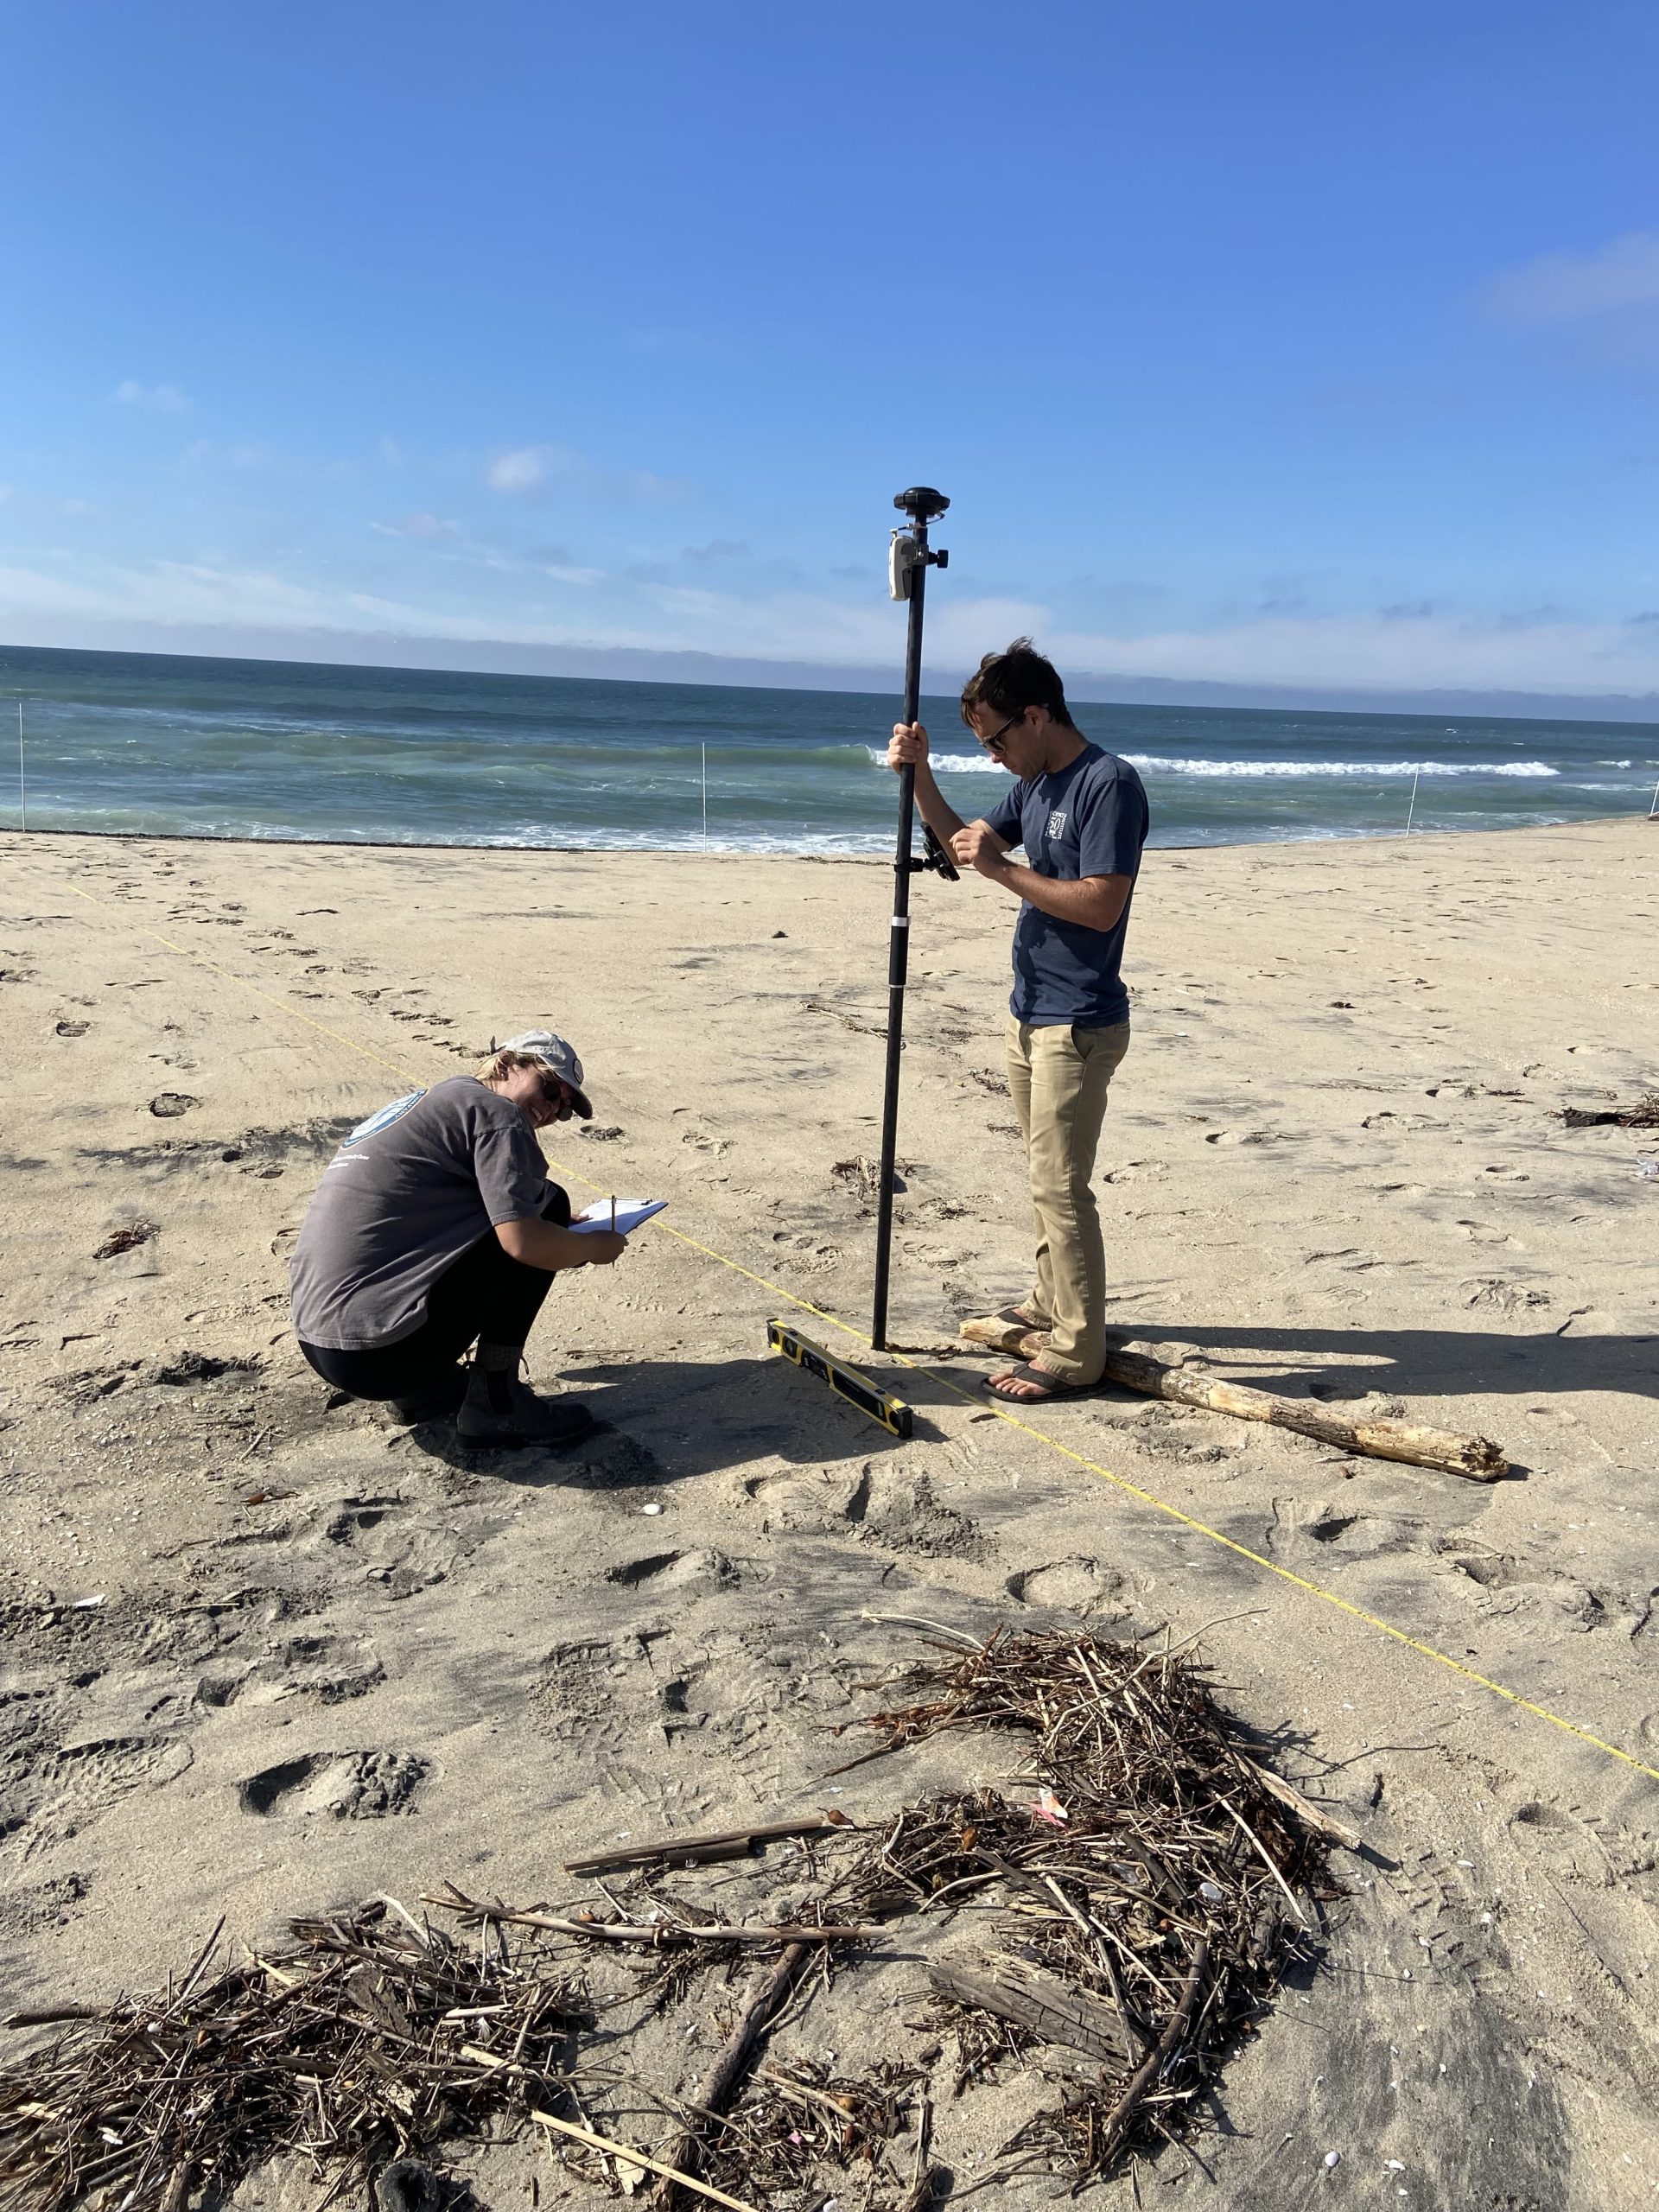 California beach and dune study, collecting data during transect survey with ArcGIS Field Maps, Eos Arrow Gold GNSS receiver